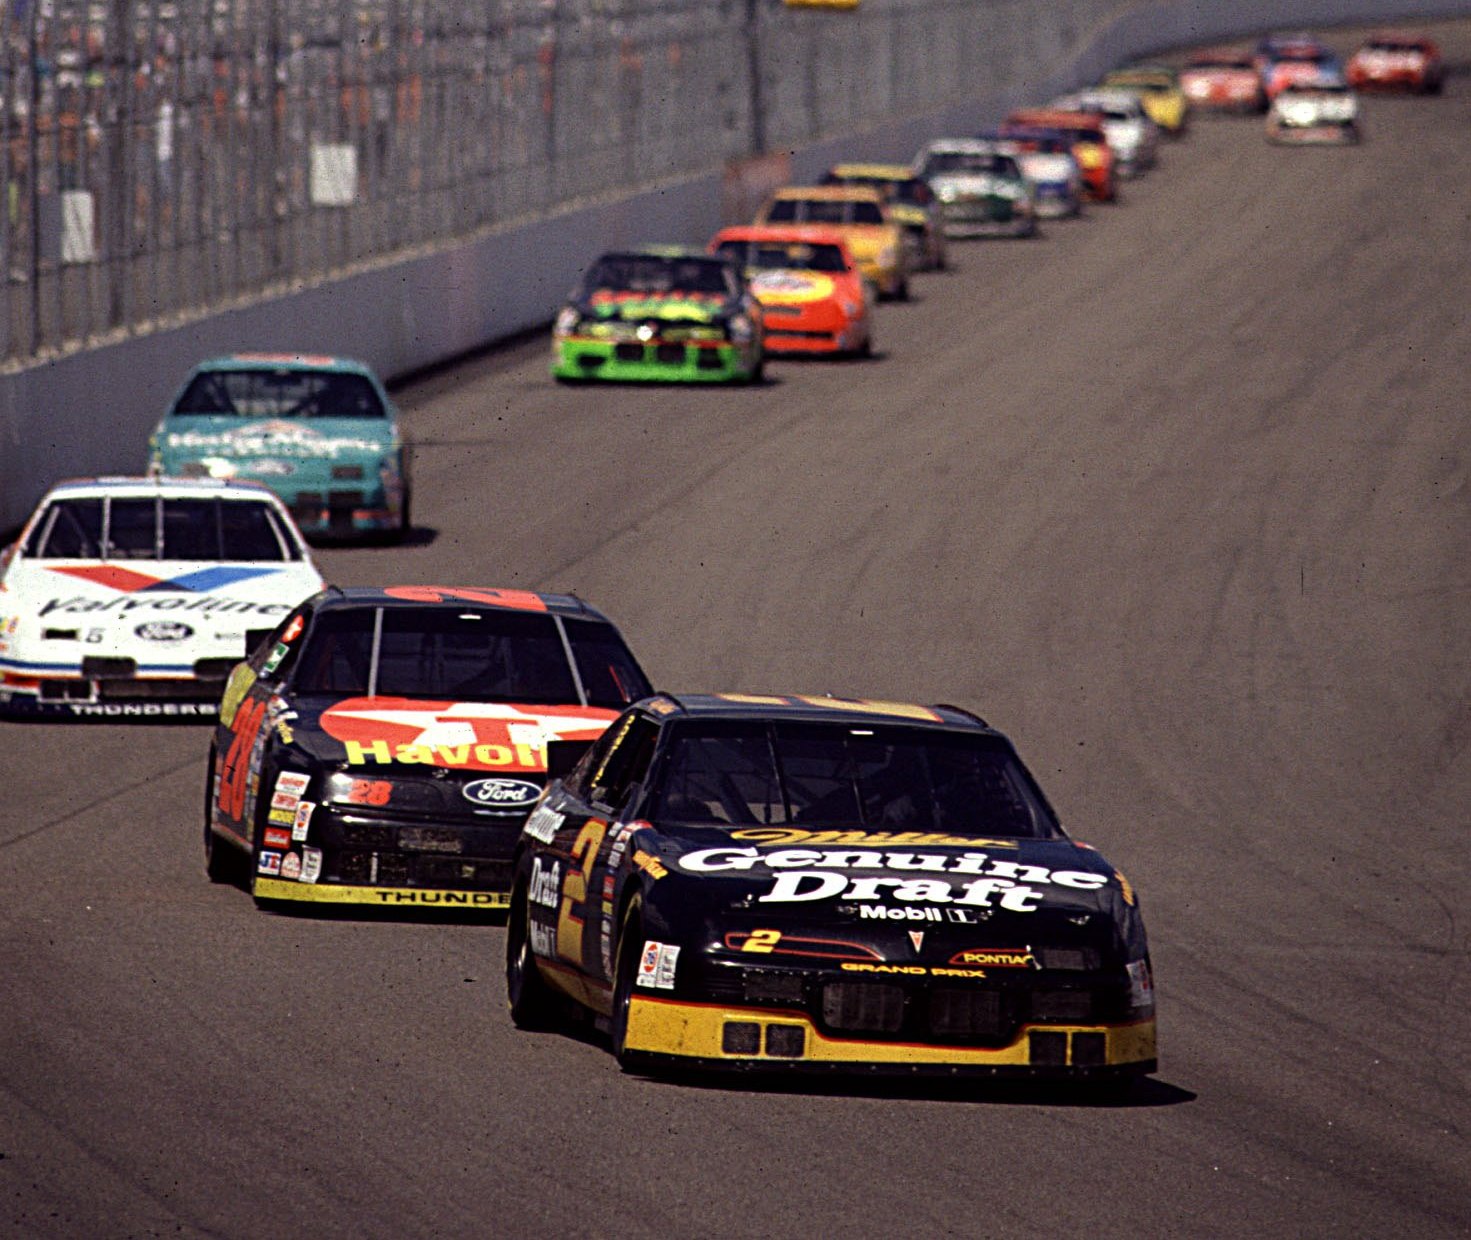 One of Gordon's fiercest rivals from 1993 to 2005 was Rusty Wallace, pictured here in the 1993 New Hampshire Cup race. (Photo: RacingOne | Getty Images)